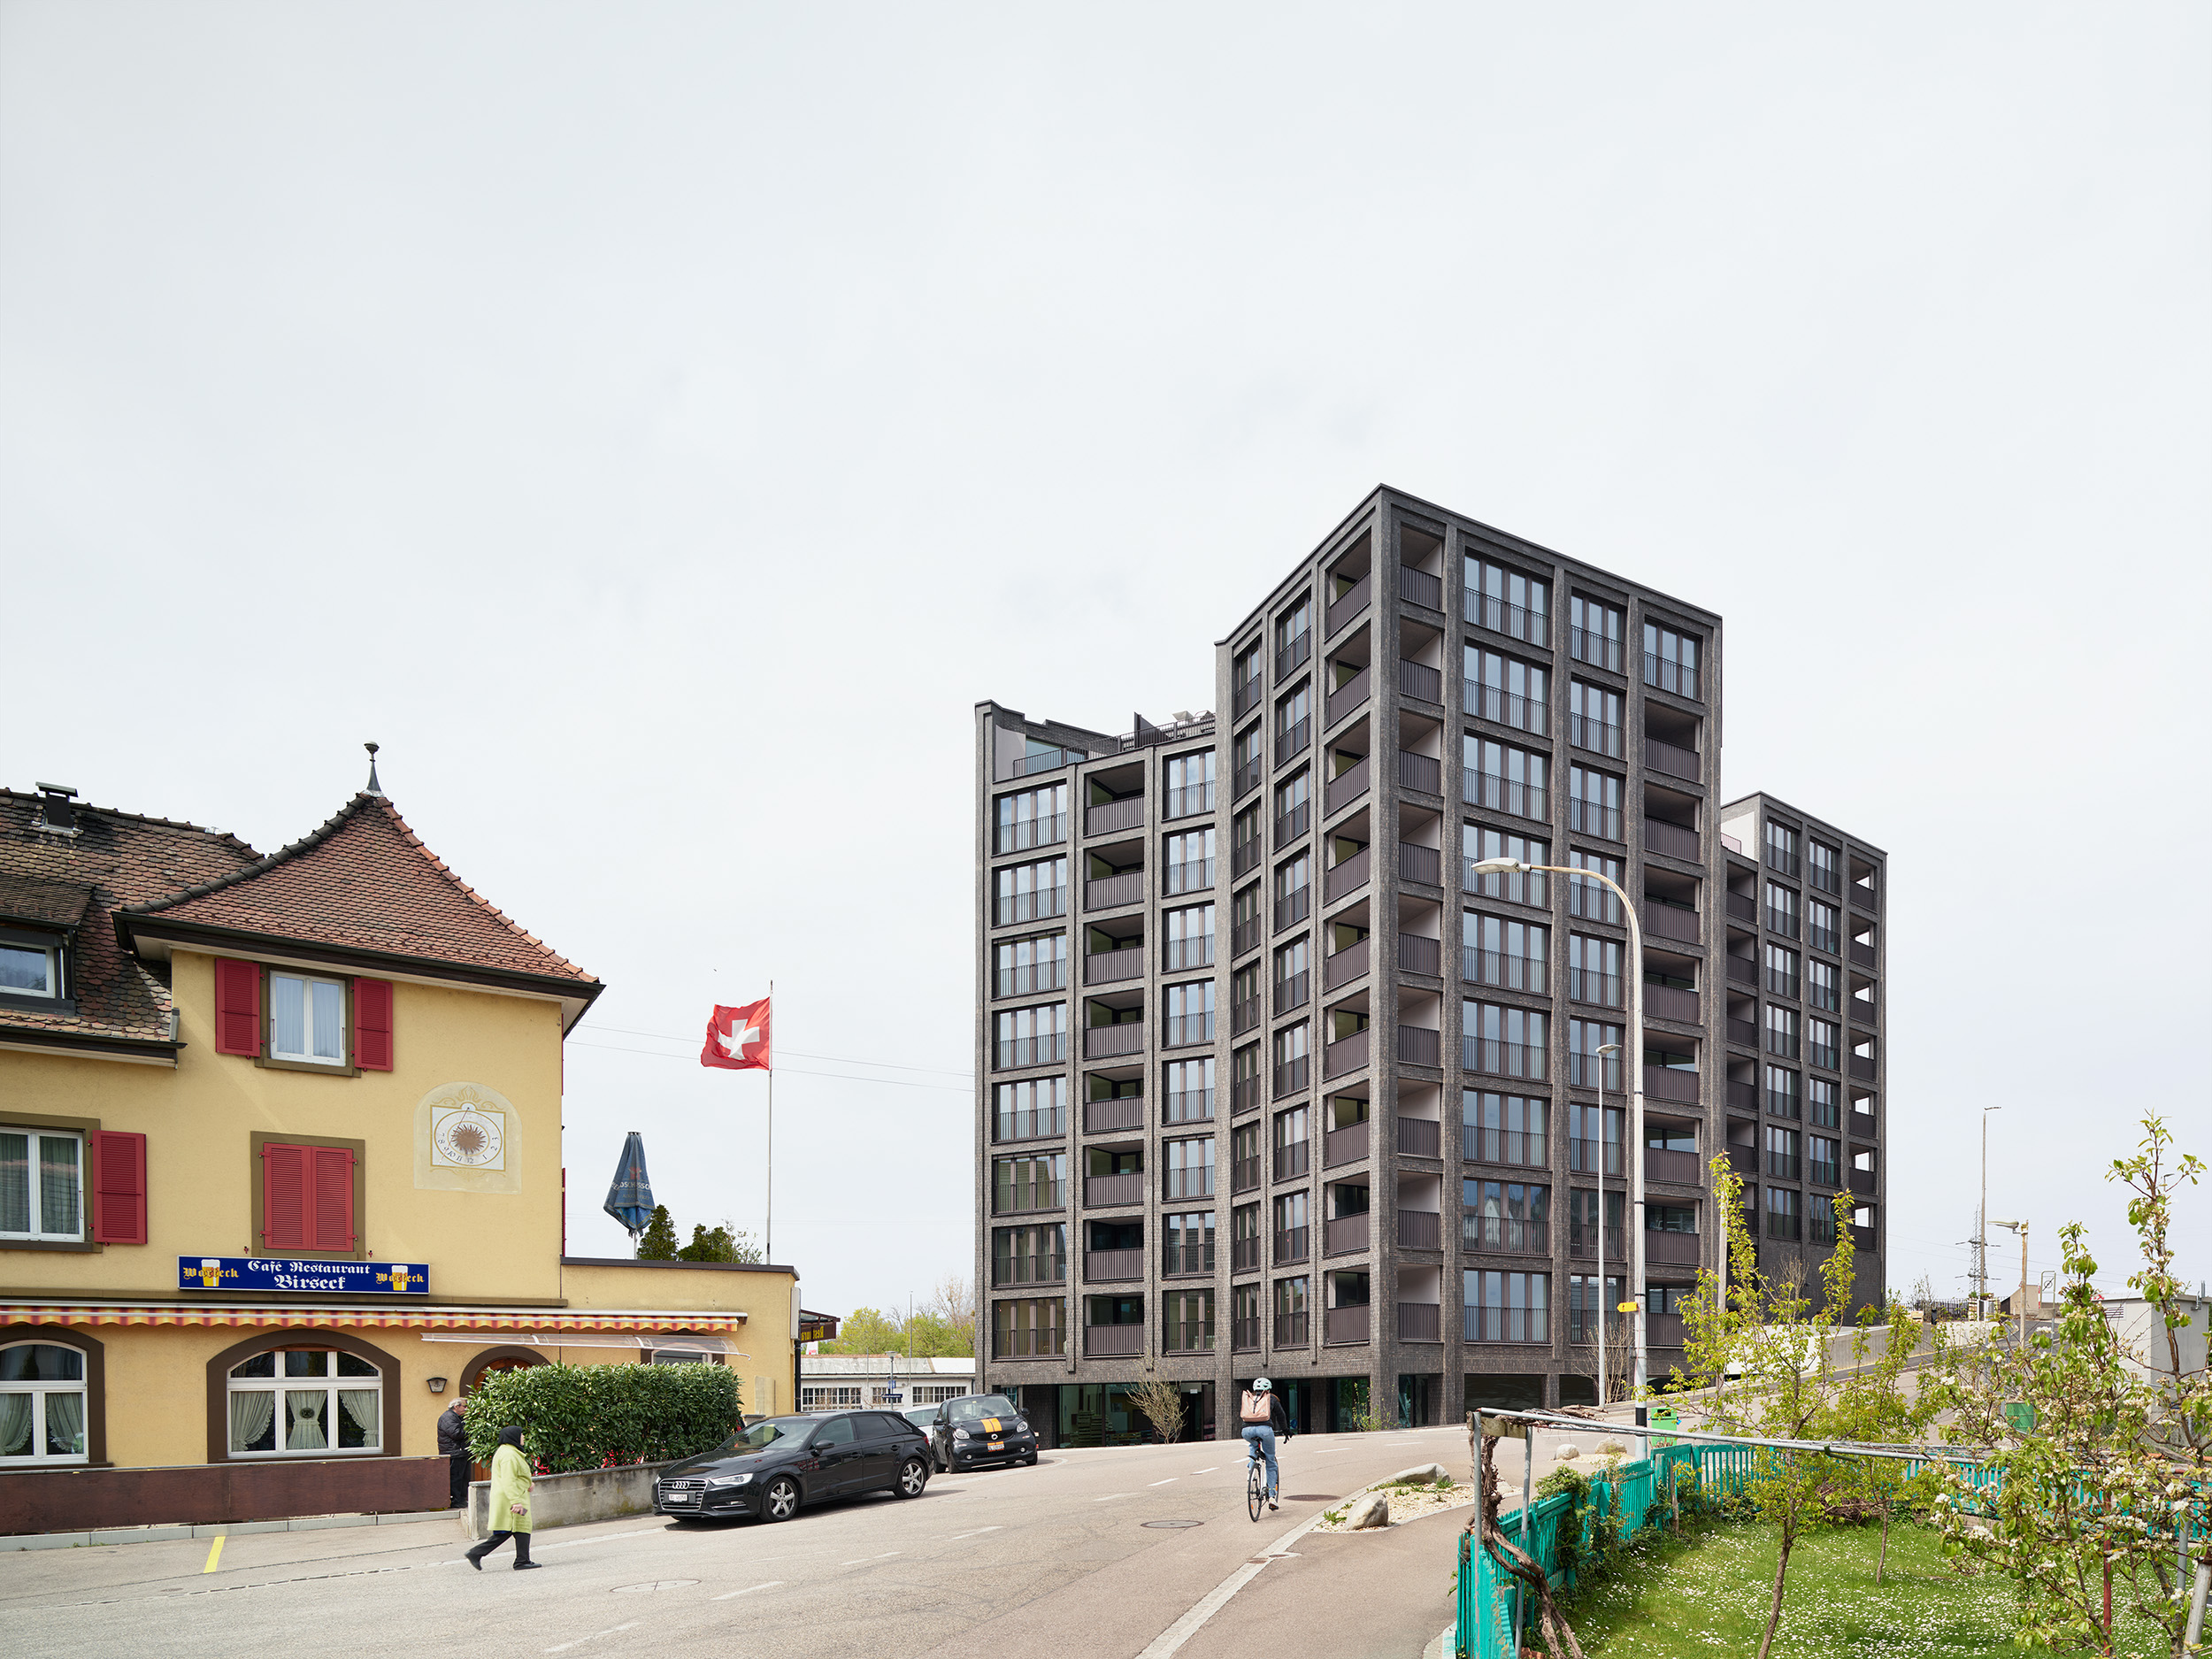 Exclusive living quality in the heart of Münchenstein: Discover this modern residential building in a prime location. Enjoy the comfort and high-quality amenities of this residential complex, located directly at the train station. With controlled ventilat